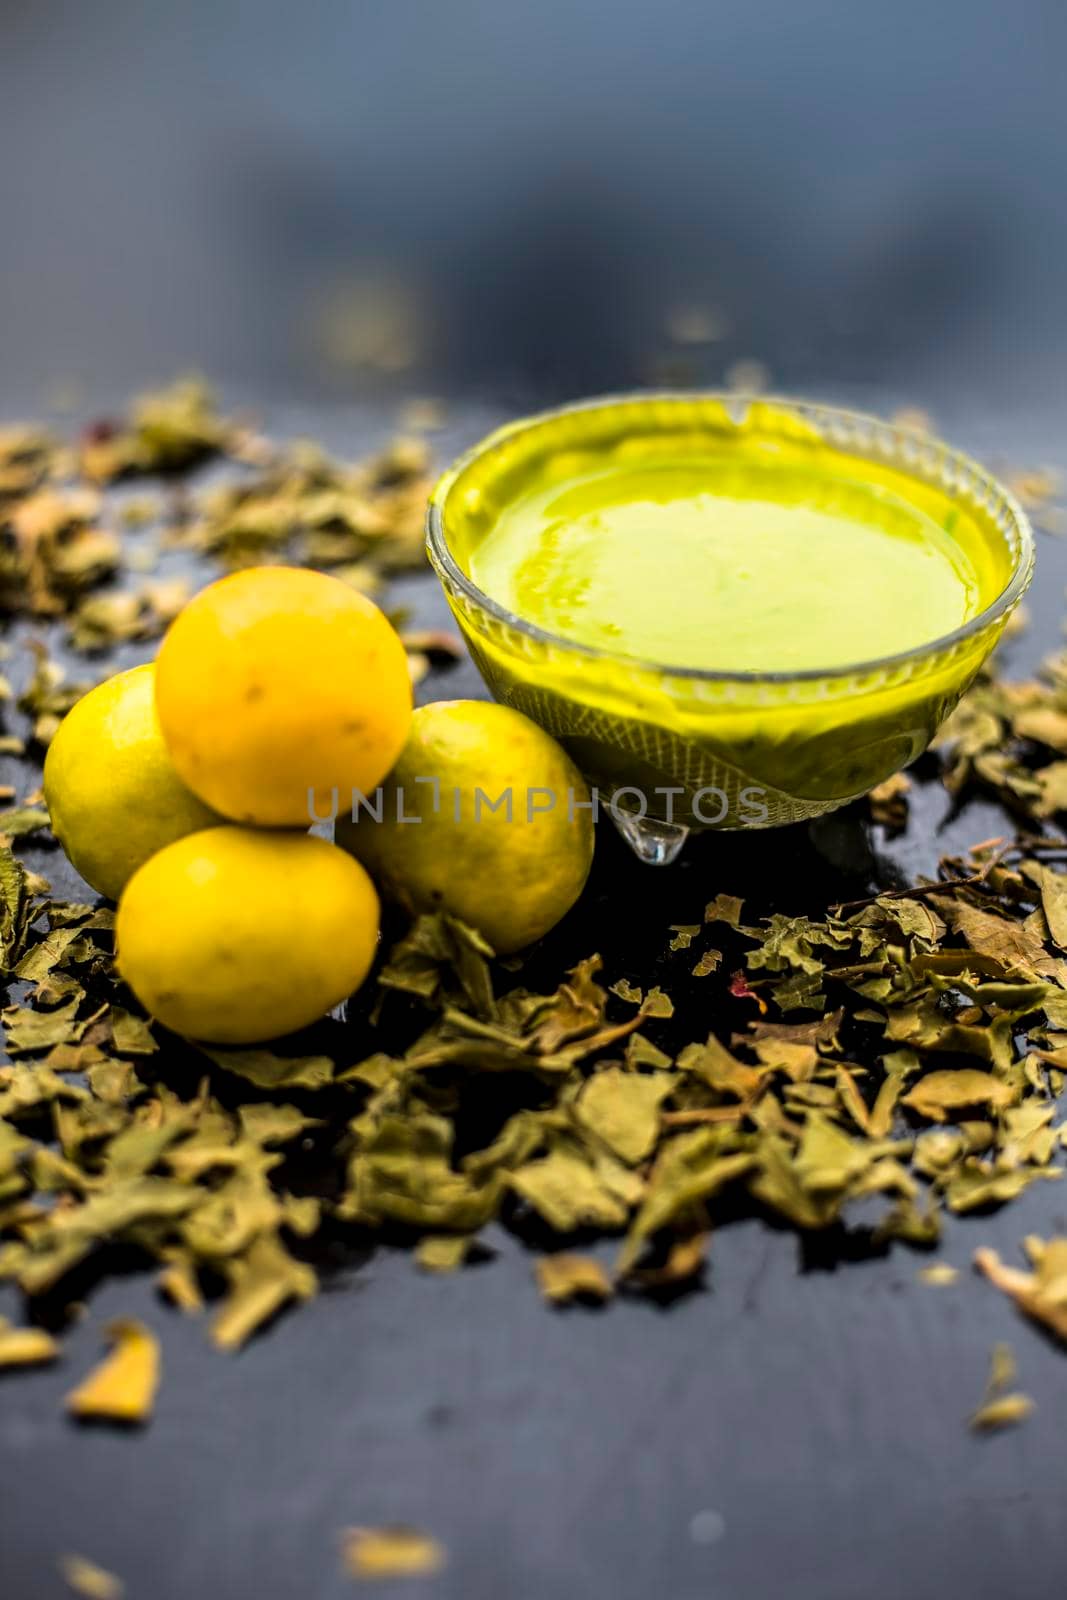 Neem or Indian Lilac face mask on the black wooden surface for oily skin consisting of neem leaves paste and lemon juice well mixed with rose water.